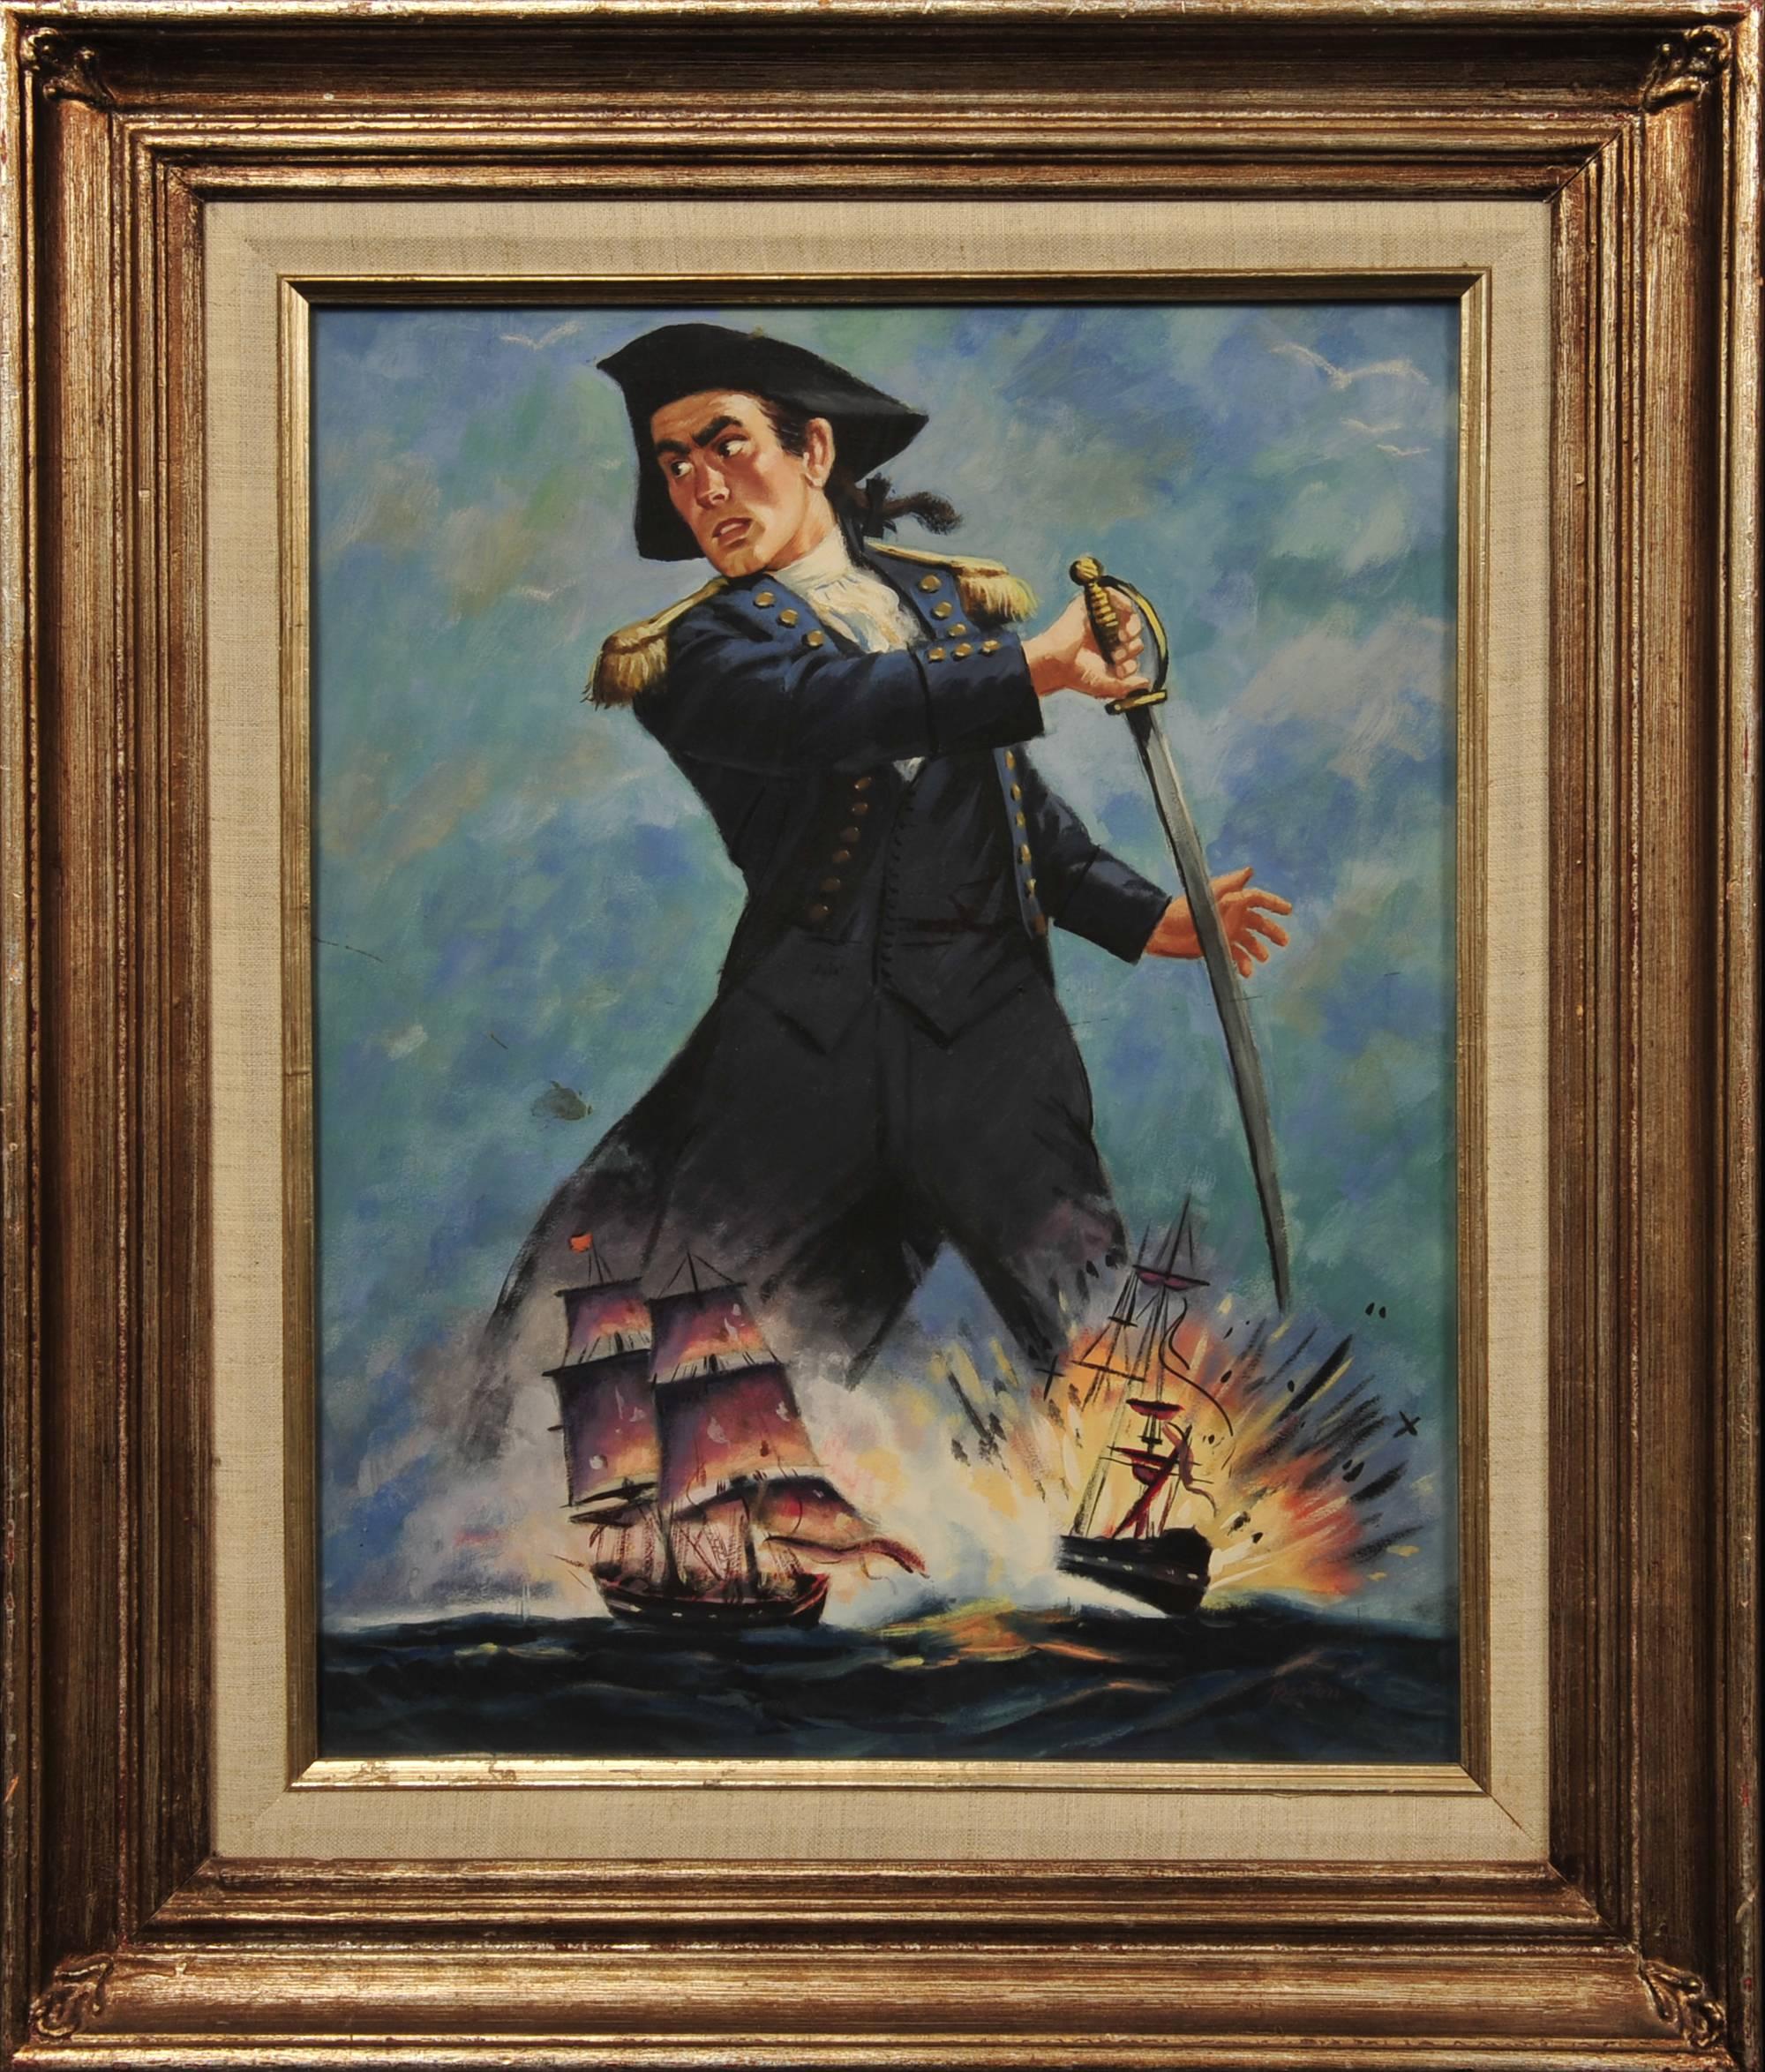 The Swashbuckler - Painting by Barton